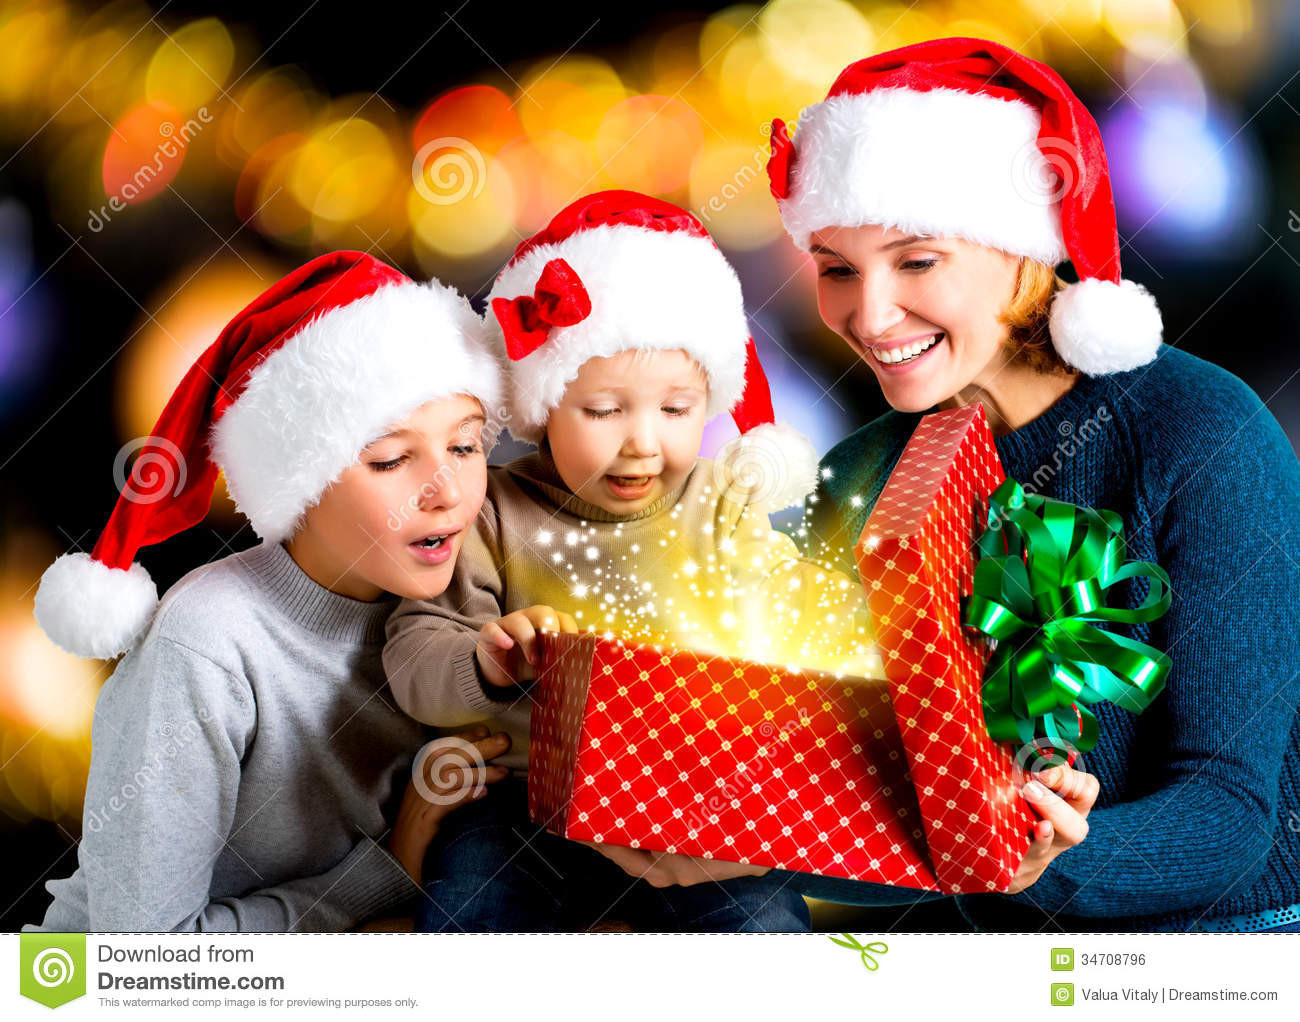 Free Christmas Gifts For Children
 Mother With Children Opens The Box With Gifts The